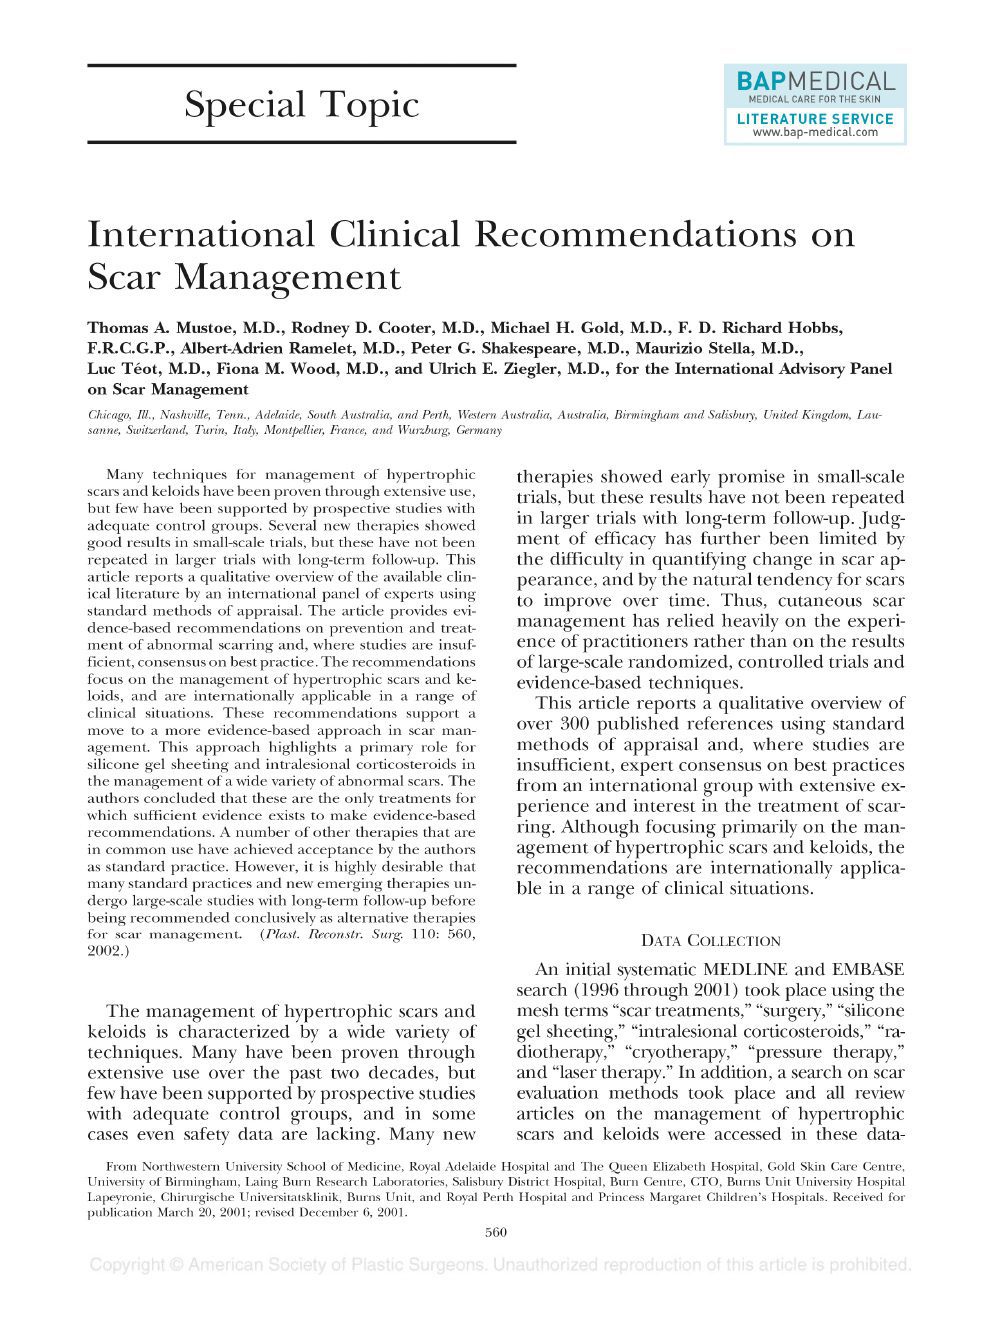 International_Clinical_Recommendations_on_Scar_Man-1